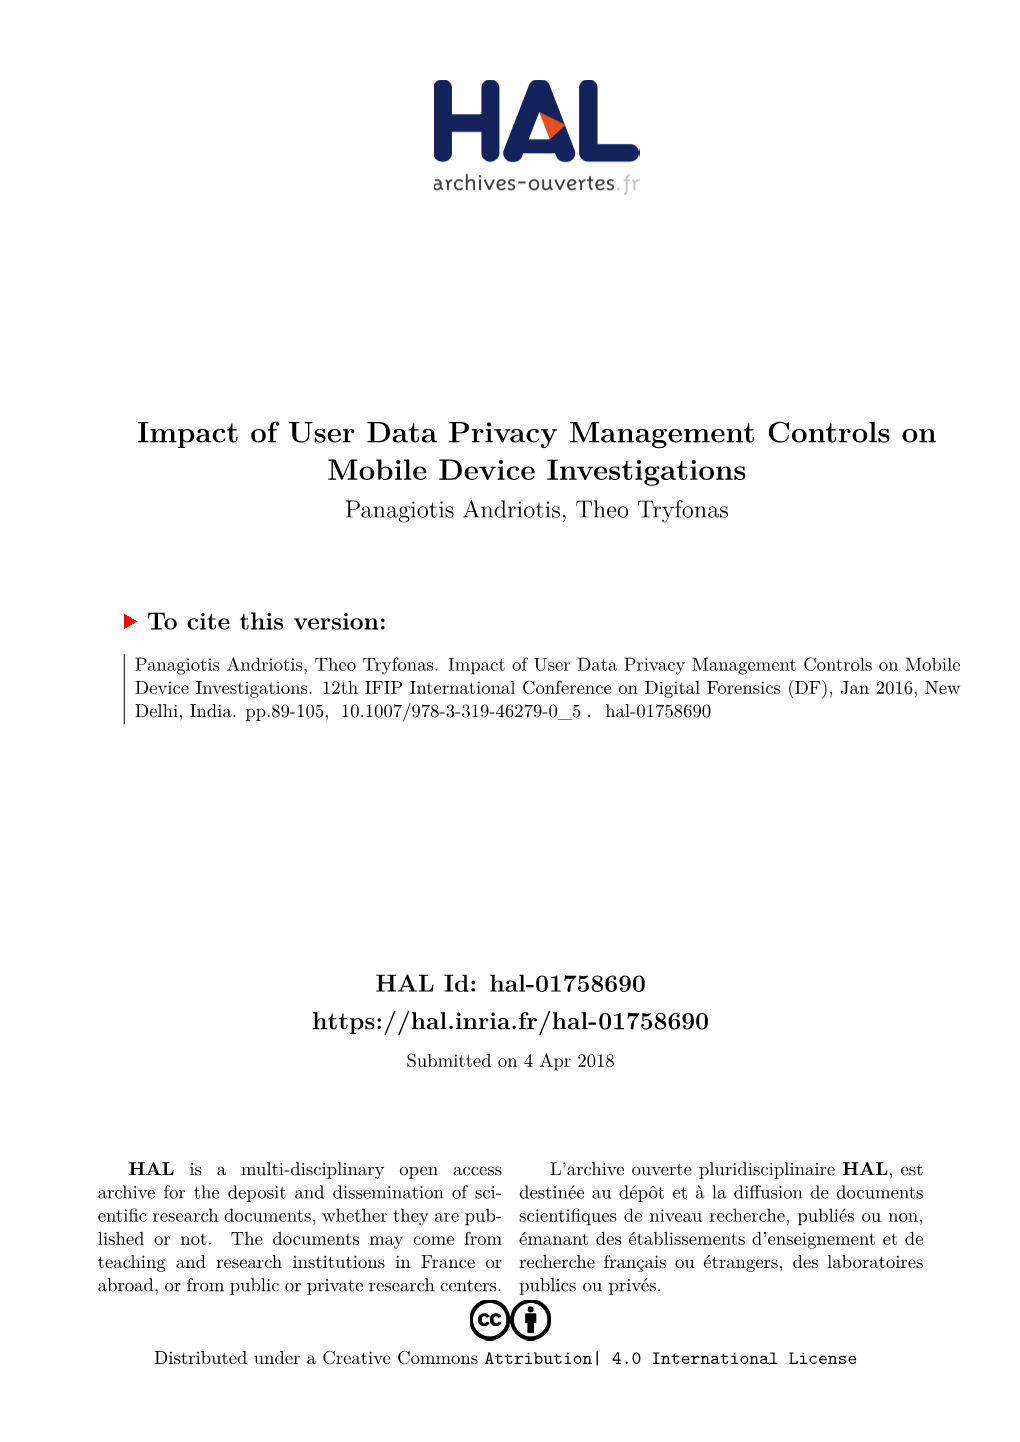 Impact of User Data Privacy Management Controls on Mobile Device Investigations Panagiotis Andriotis, Theo Tryfonas